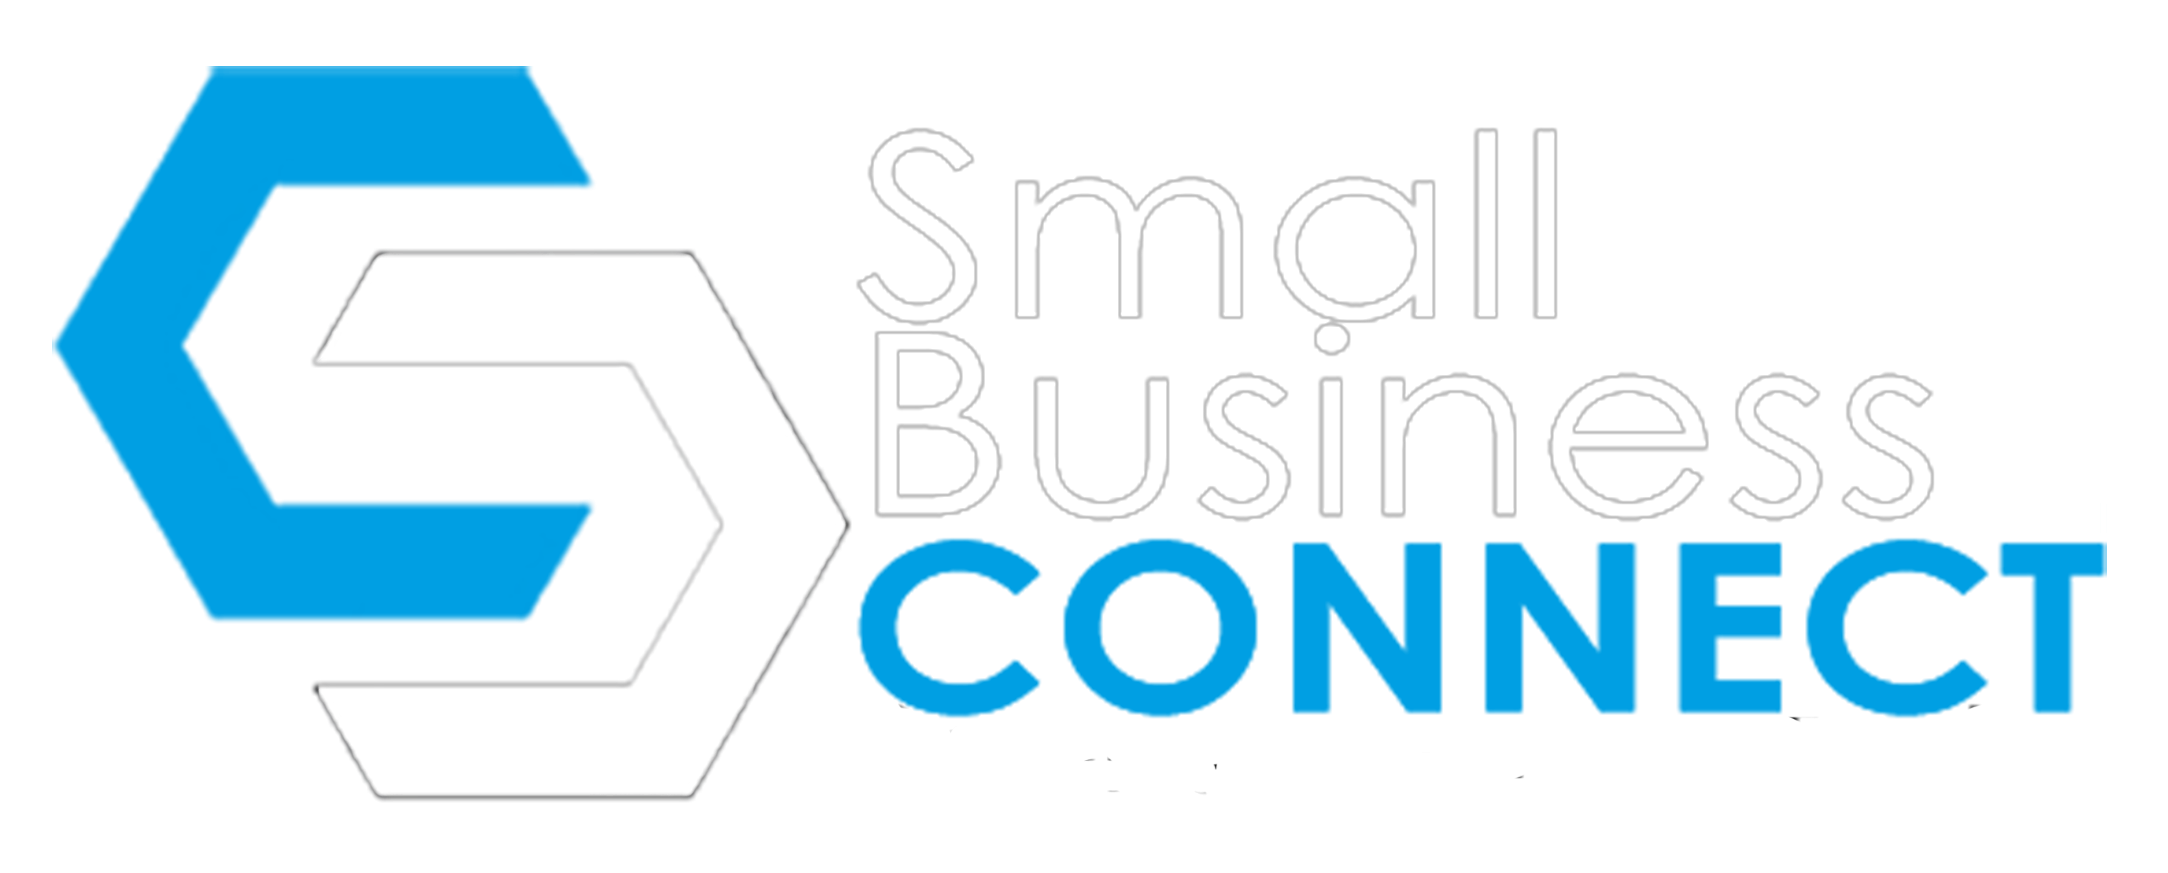 Small Business Connect